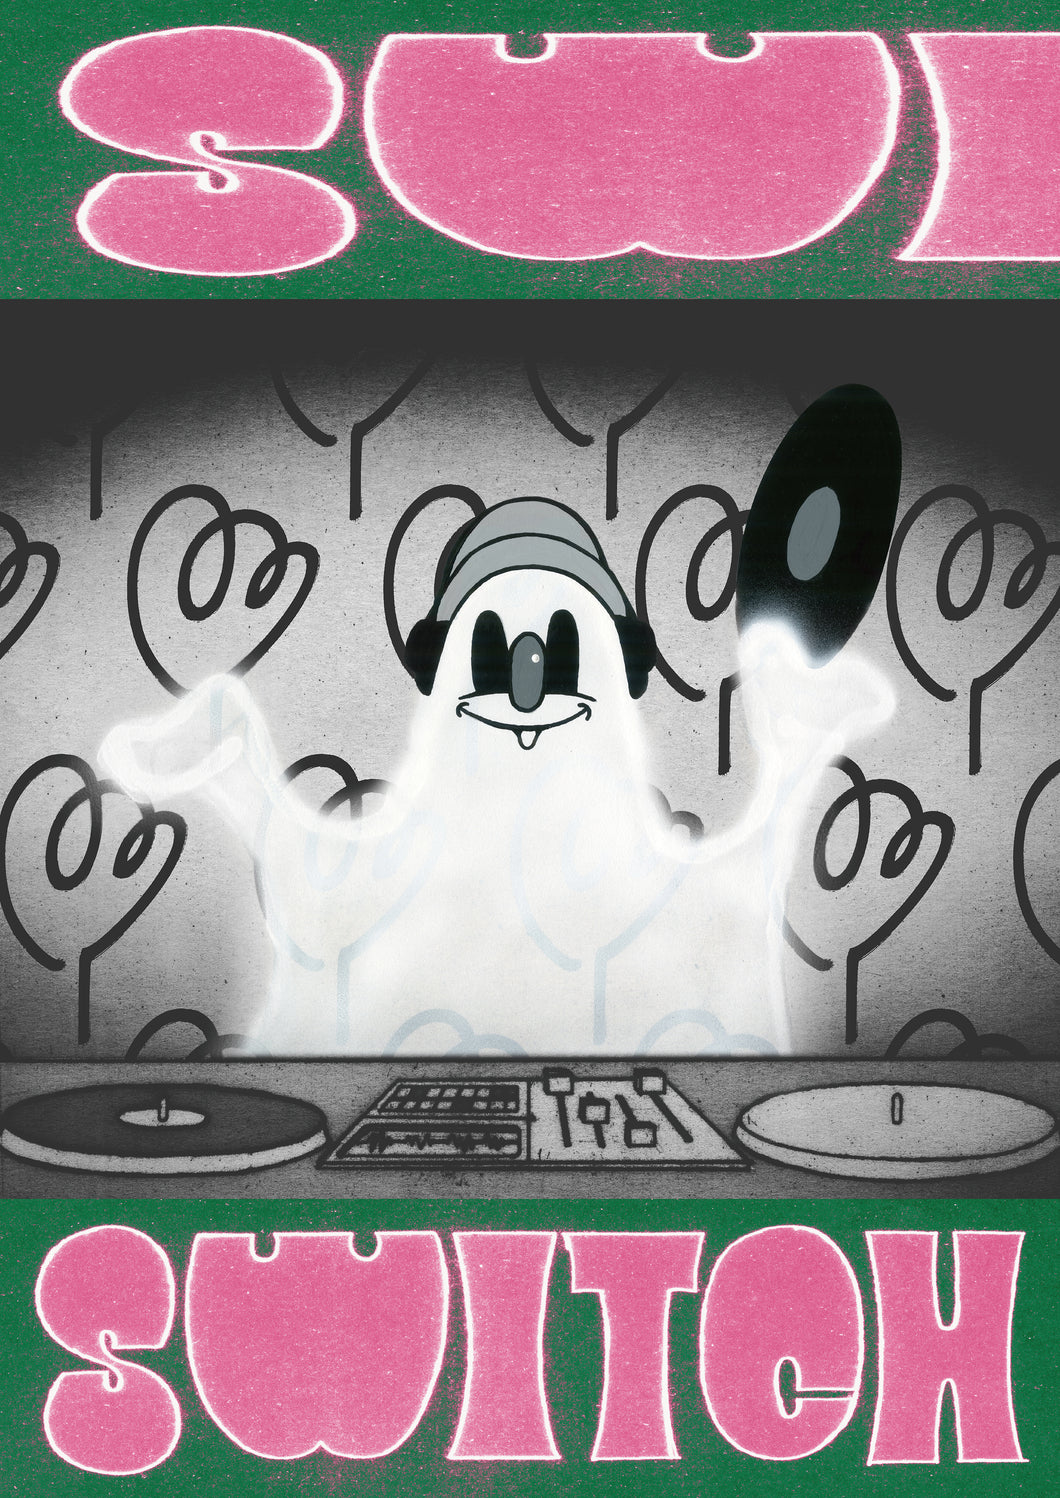 SWITCH Poster "Ghost"